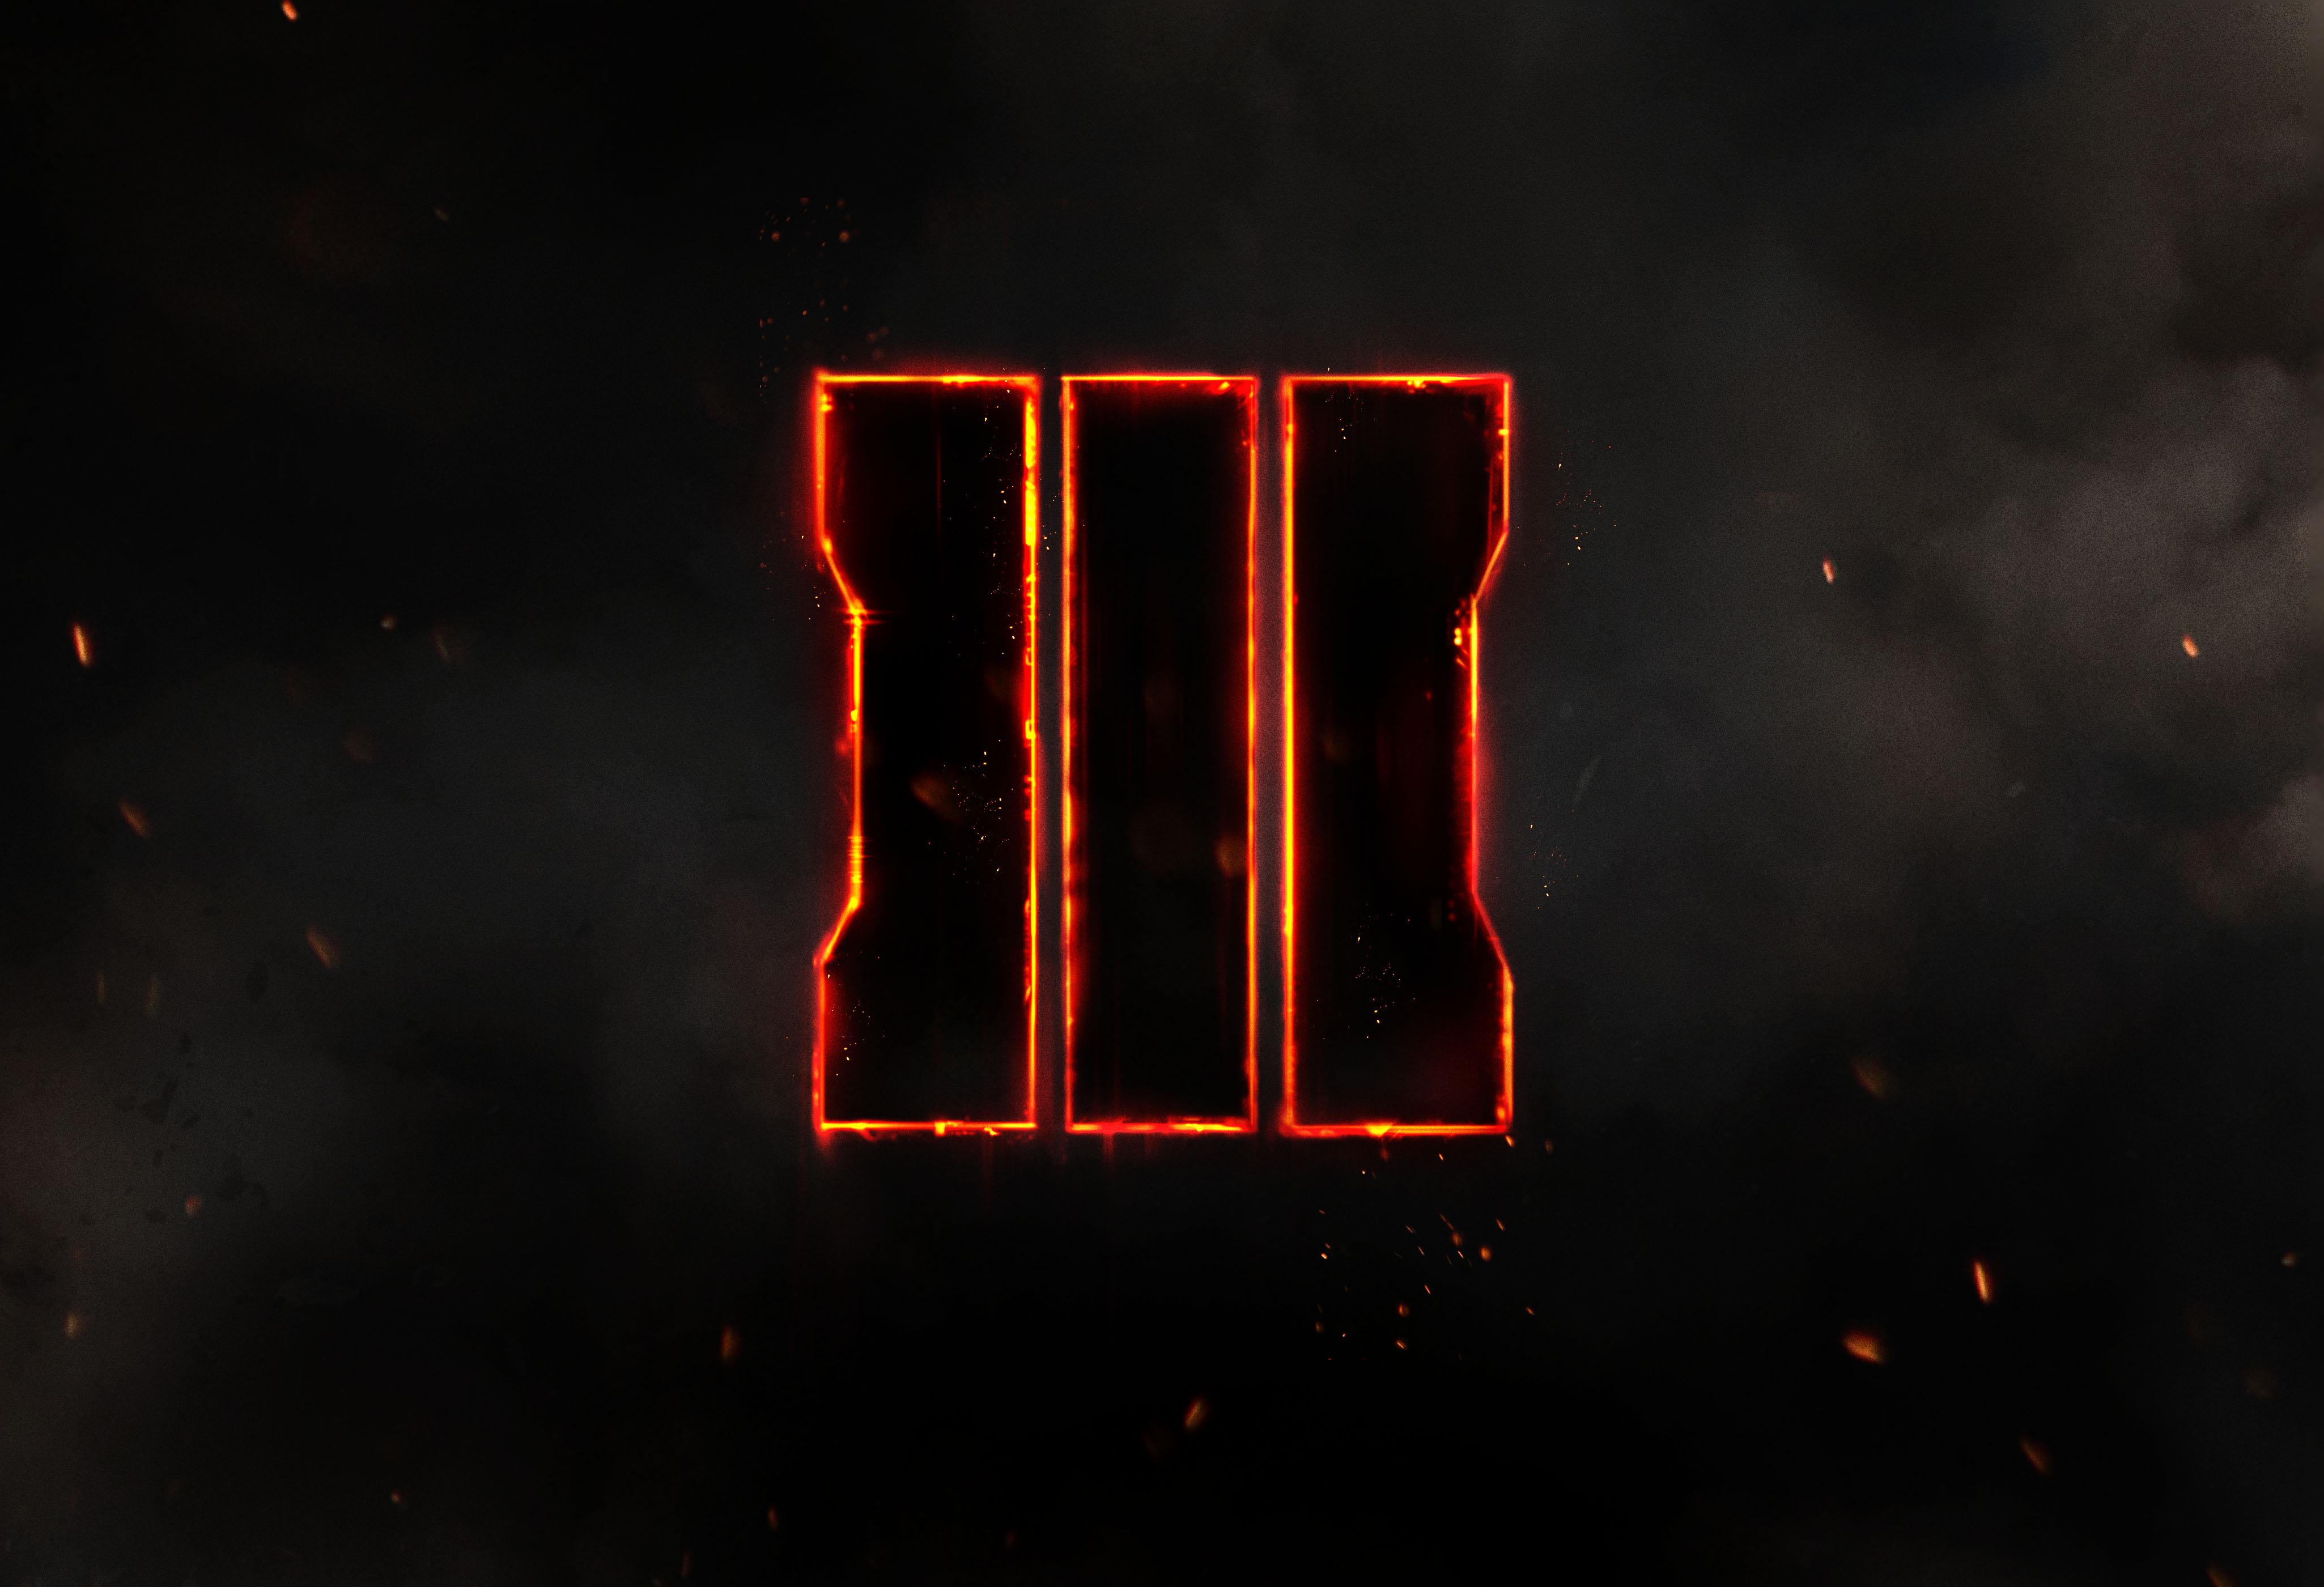 Call Of Duty Black Ops Iii Information Leaked Detail Game S